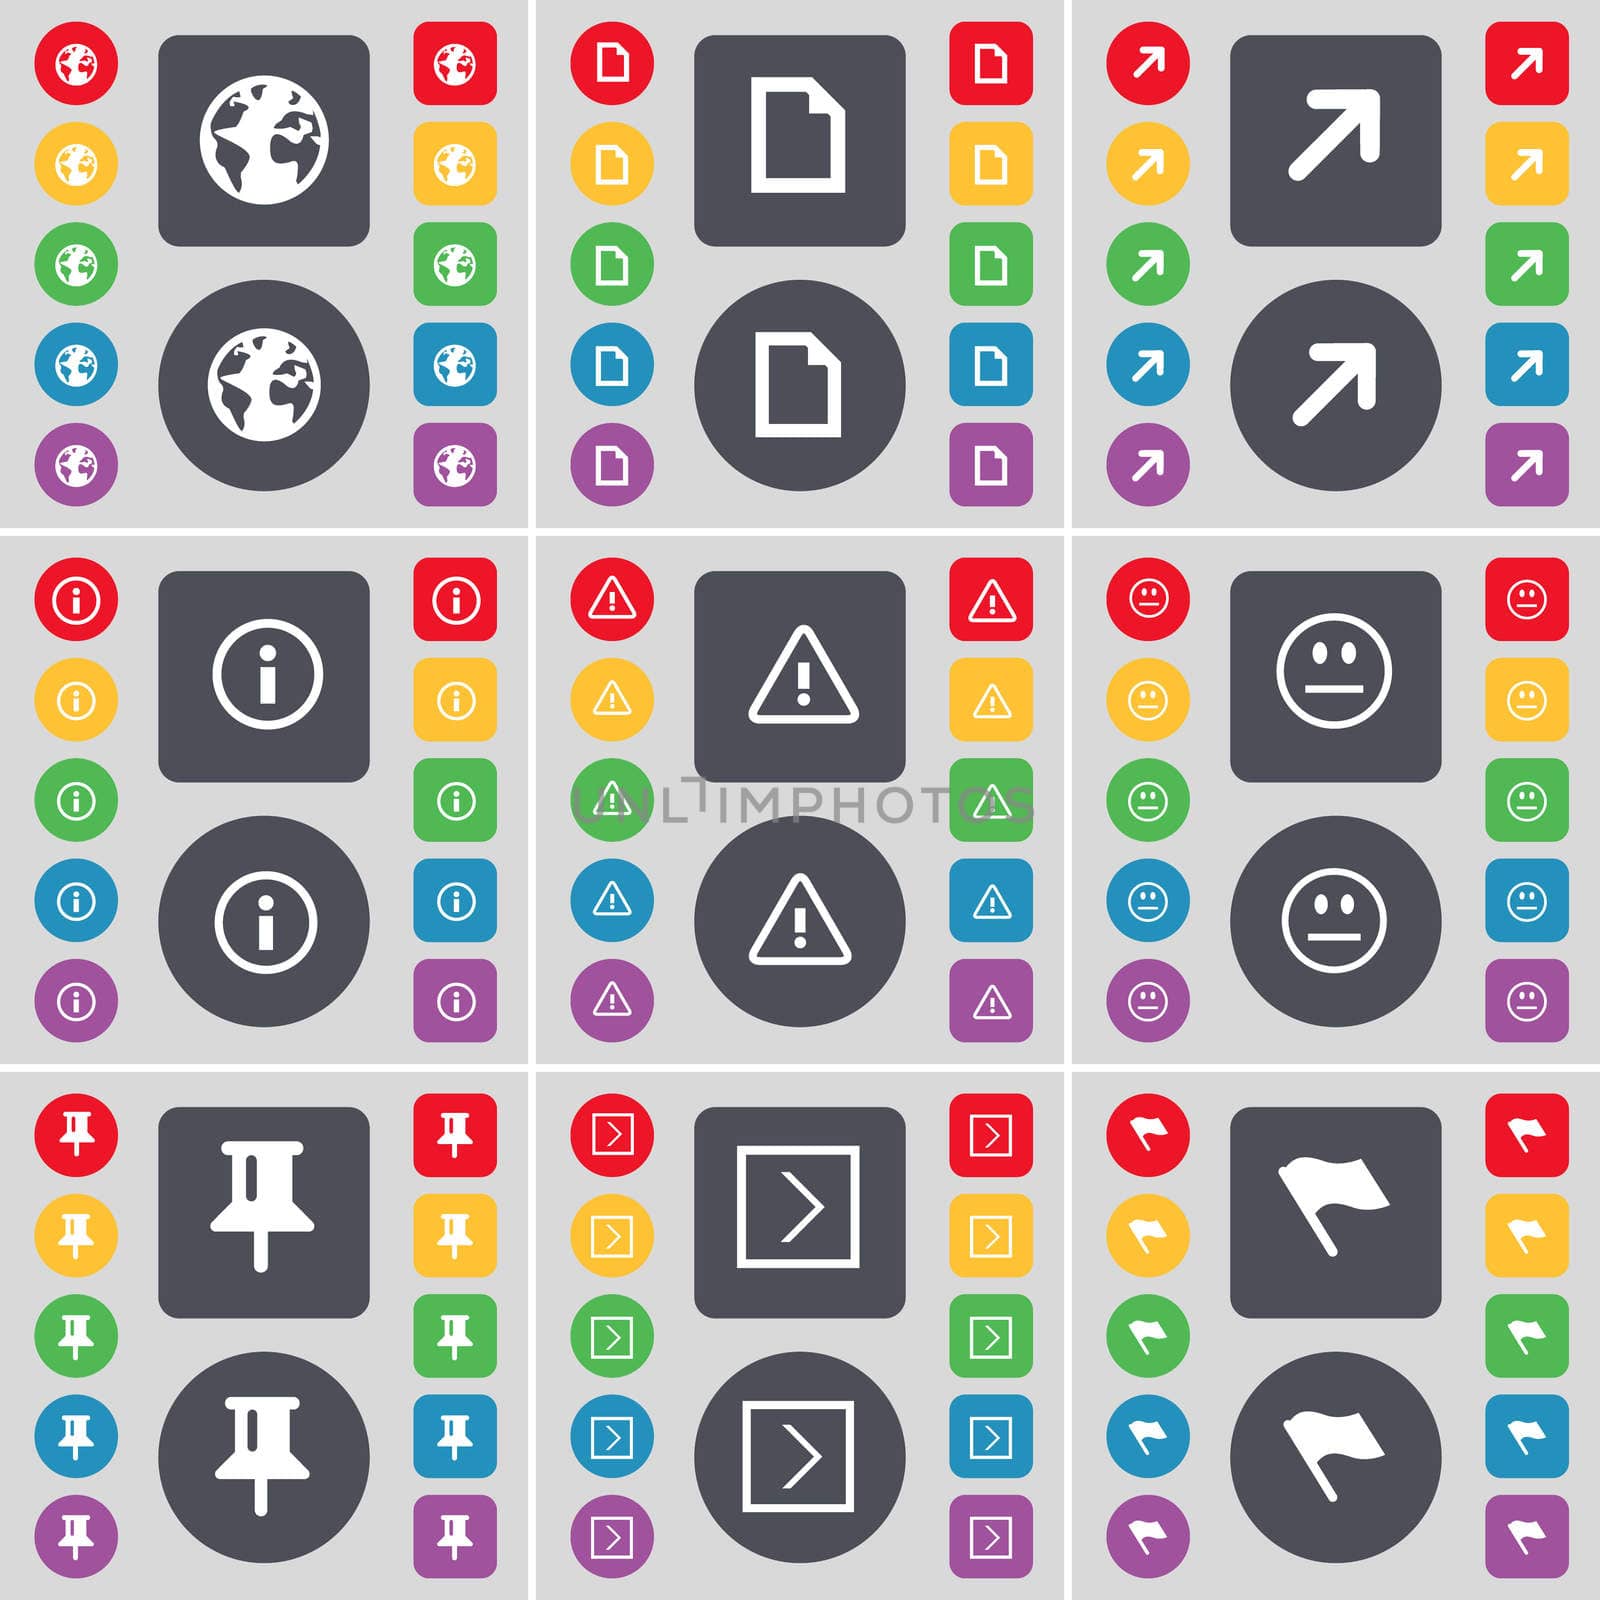 Earth, File, Full screen, Information, Warning, Smile, Pin, Arrow right, Flag icon symbol. A large set of flat, colored buttons for your design. illustration